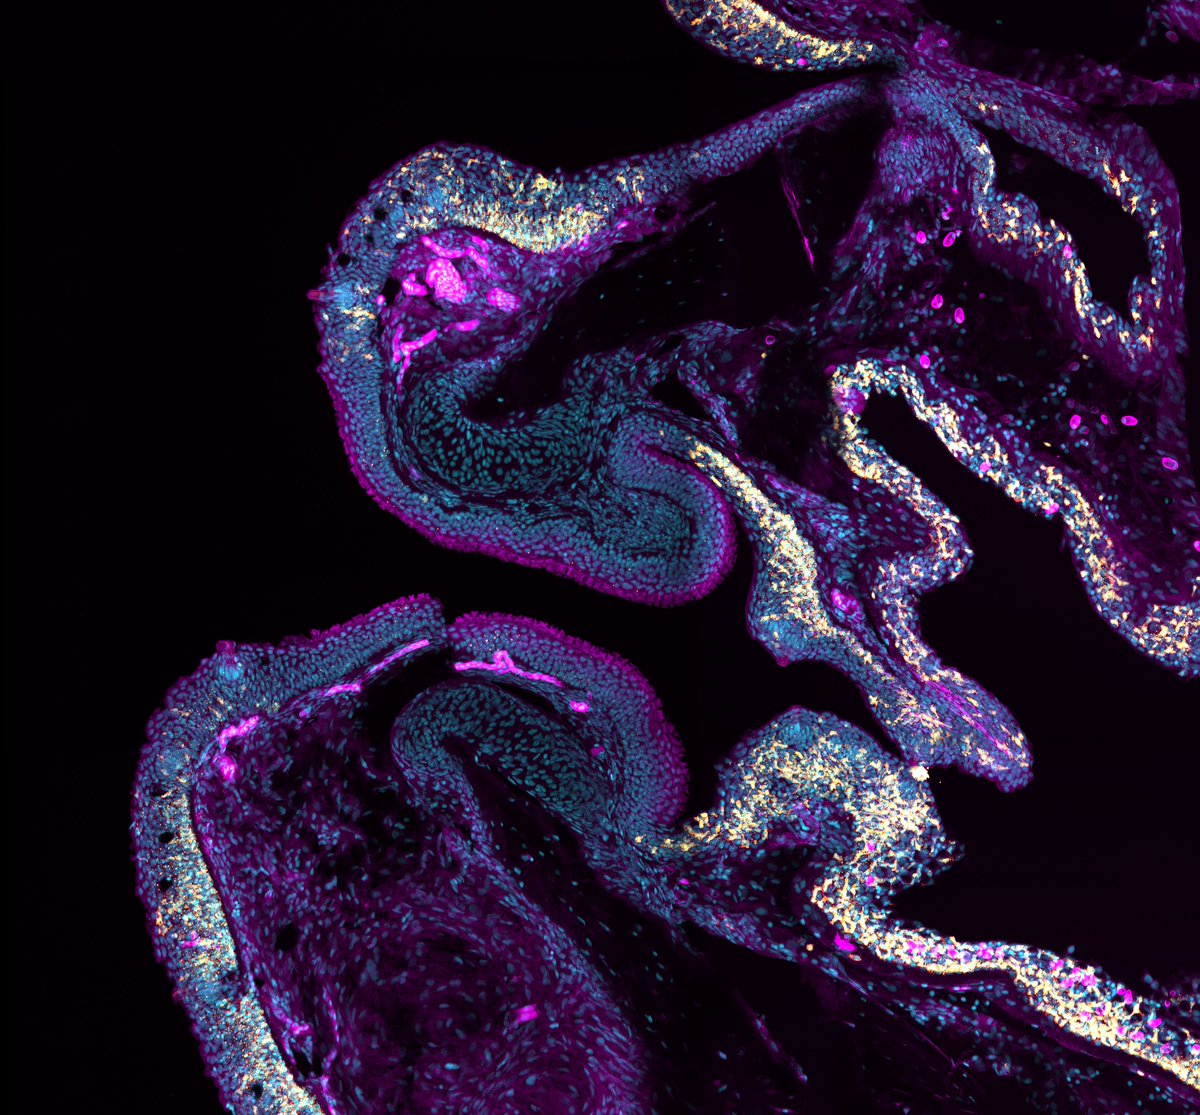 #FluorescenceFriday Adult zebrafish mouth - T/NK cells (ZAP70 yellow), Sagital cryosection. Whereas these immune cells are abundant within the squamous epithelia lining the oral mucosa and the skin, they are absent from the keratinized epithelium lining the lips of the fish.…